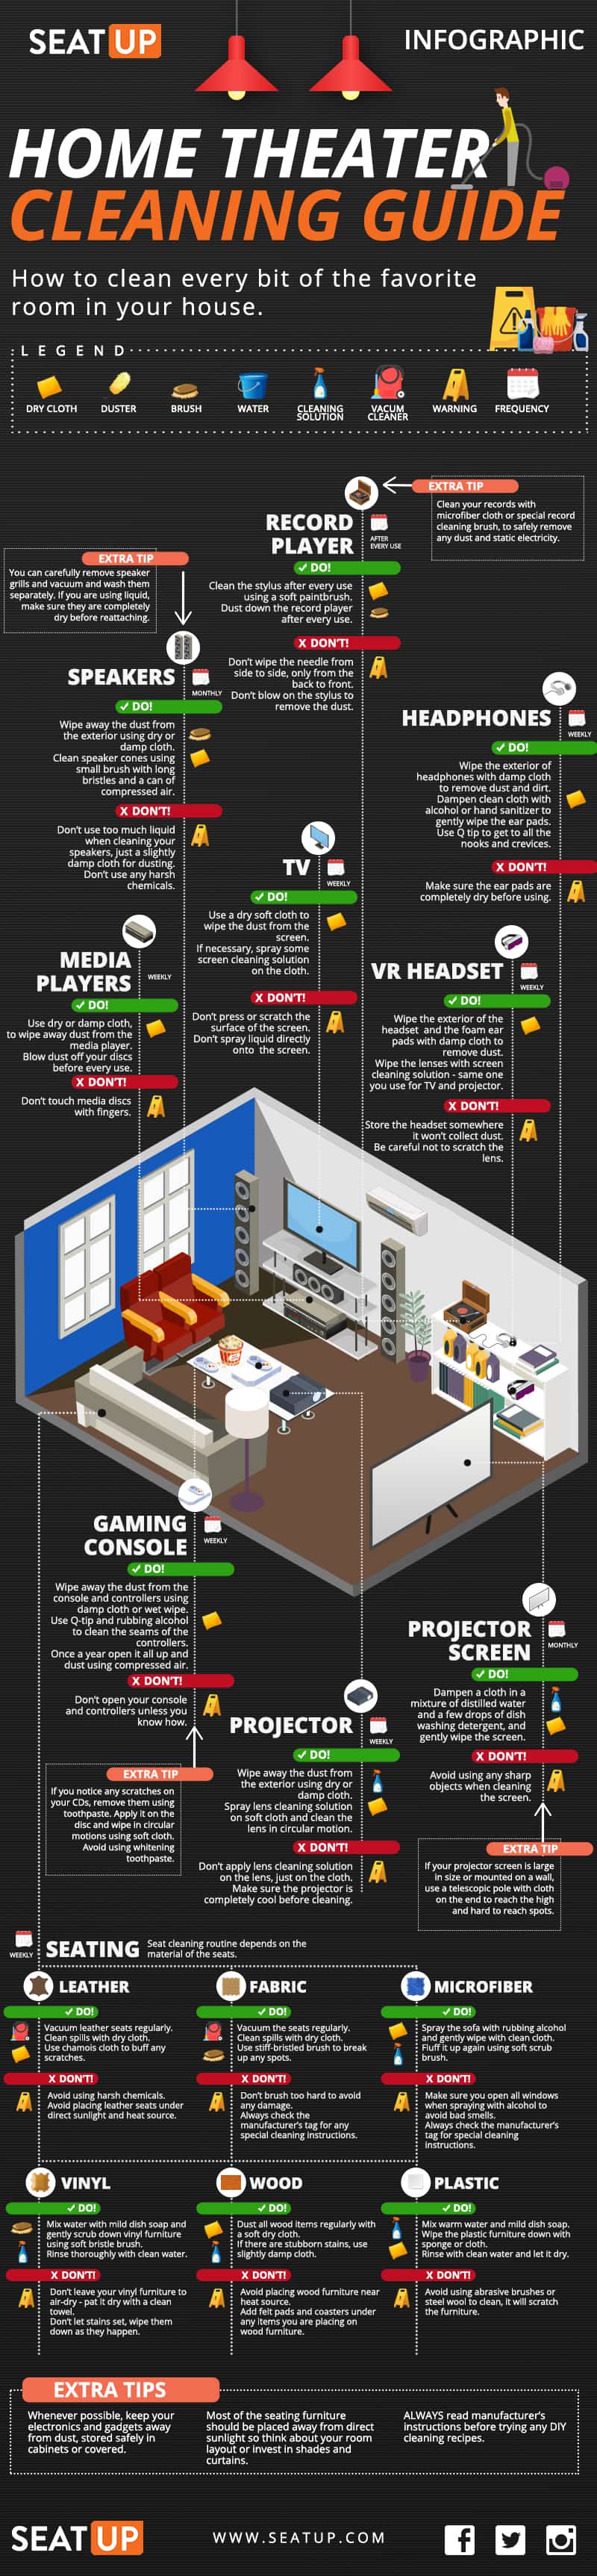 Home Theater Cleaning Guide Infographic